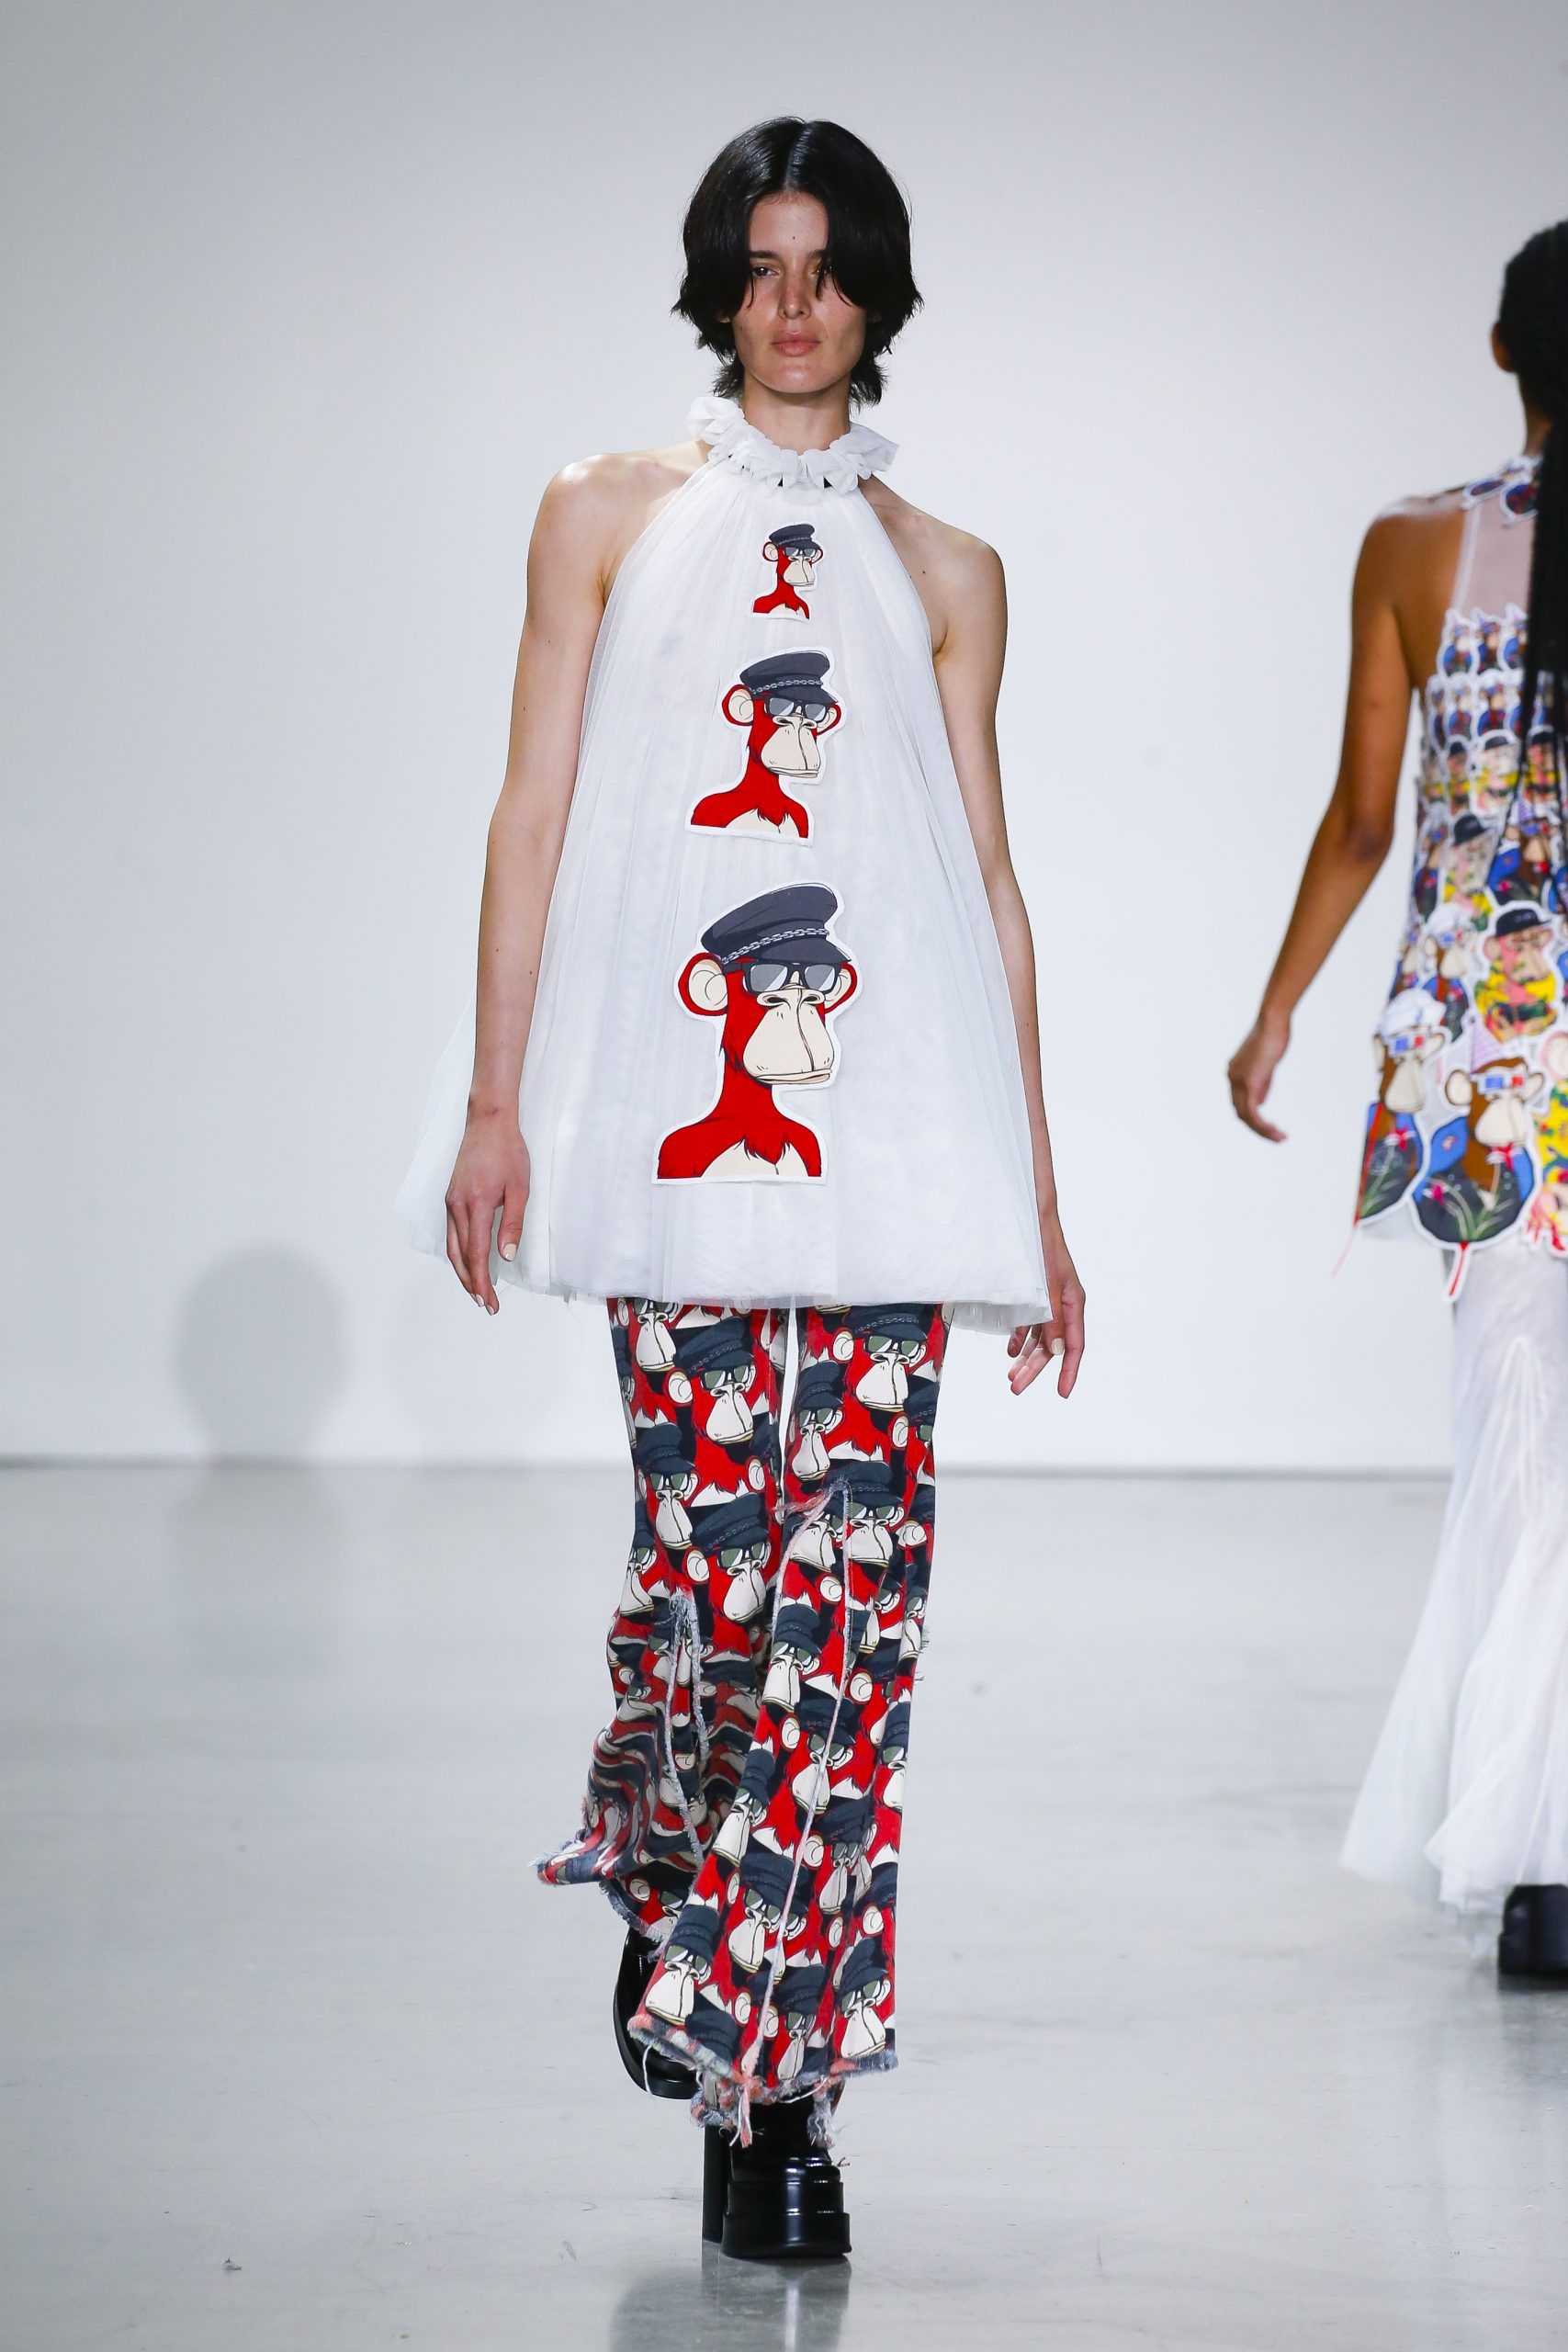 Model wearing Bored Apes collection at Vivienne Tam’s Metaverse, Past, Present, and Future SS23 show at New York Fashion Week